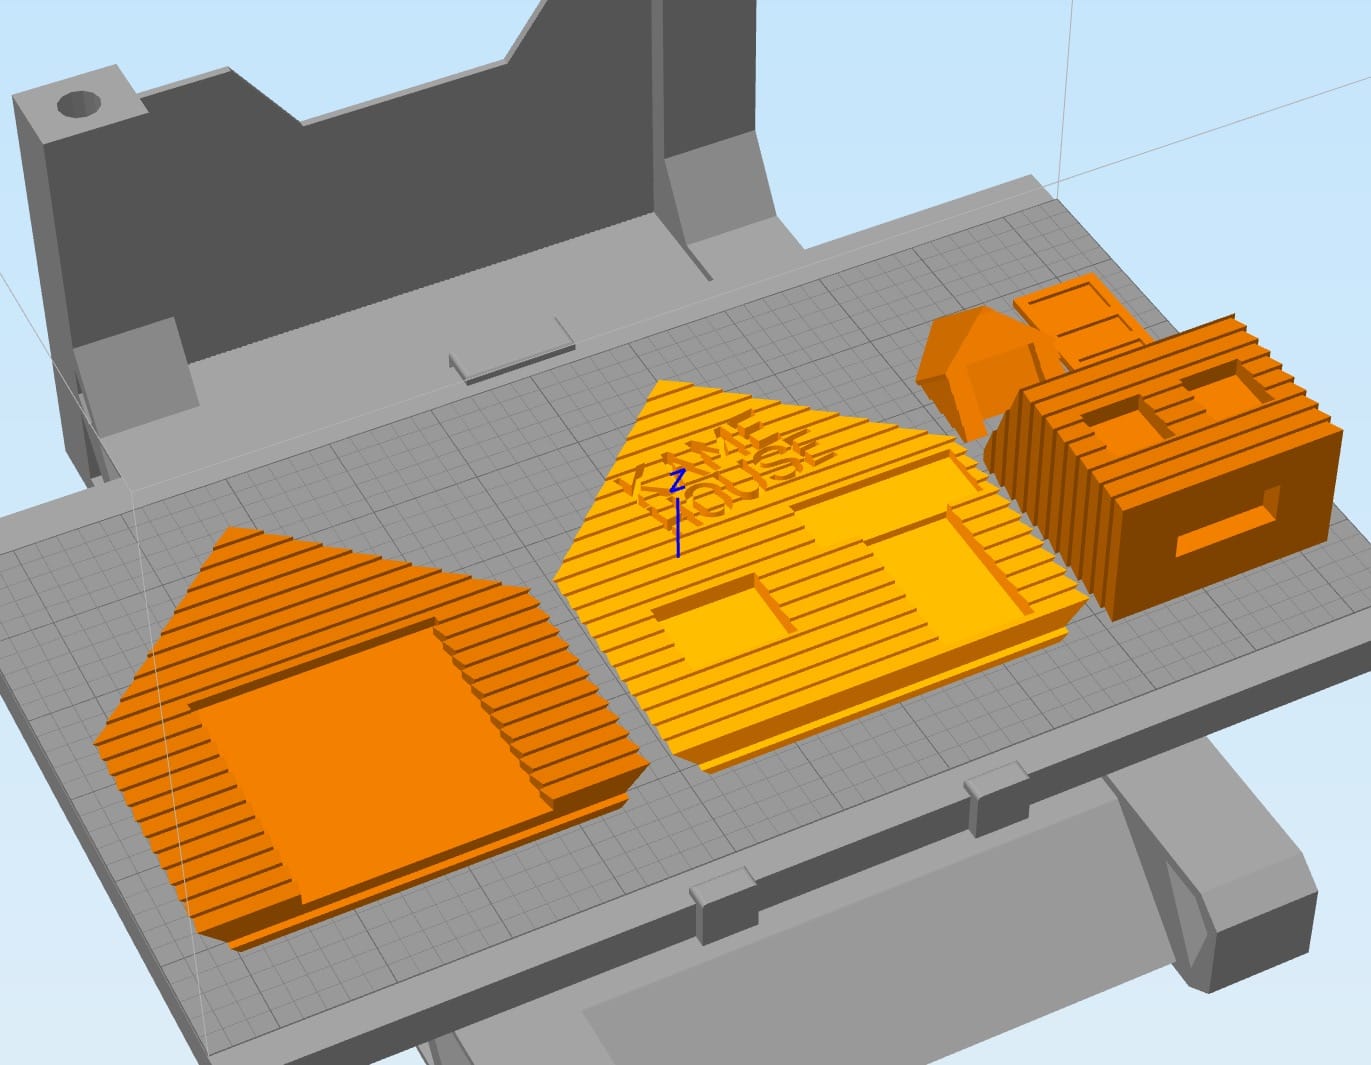  A typical 3D print plate showing some of the parts for the Kame House 3D model 